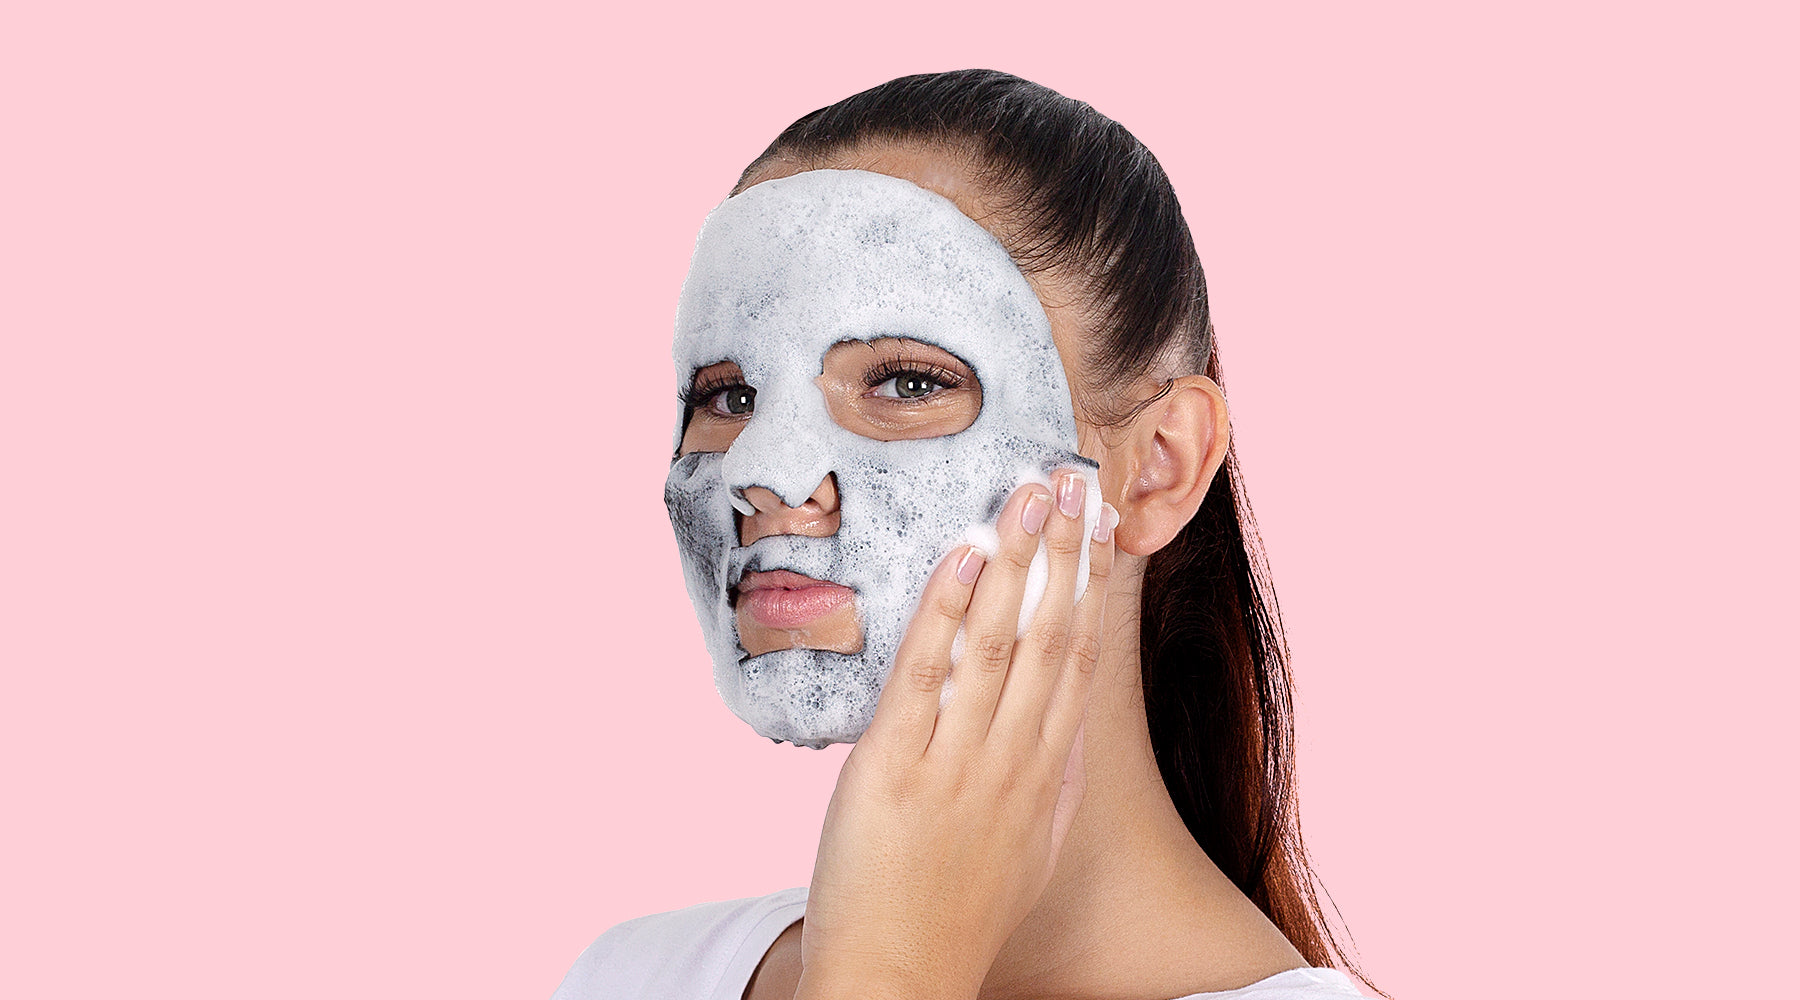 #SkinRules: How to get rid of acne